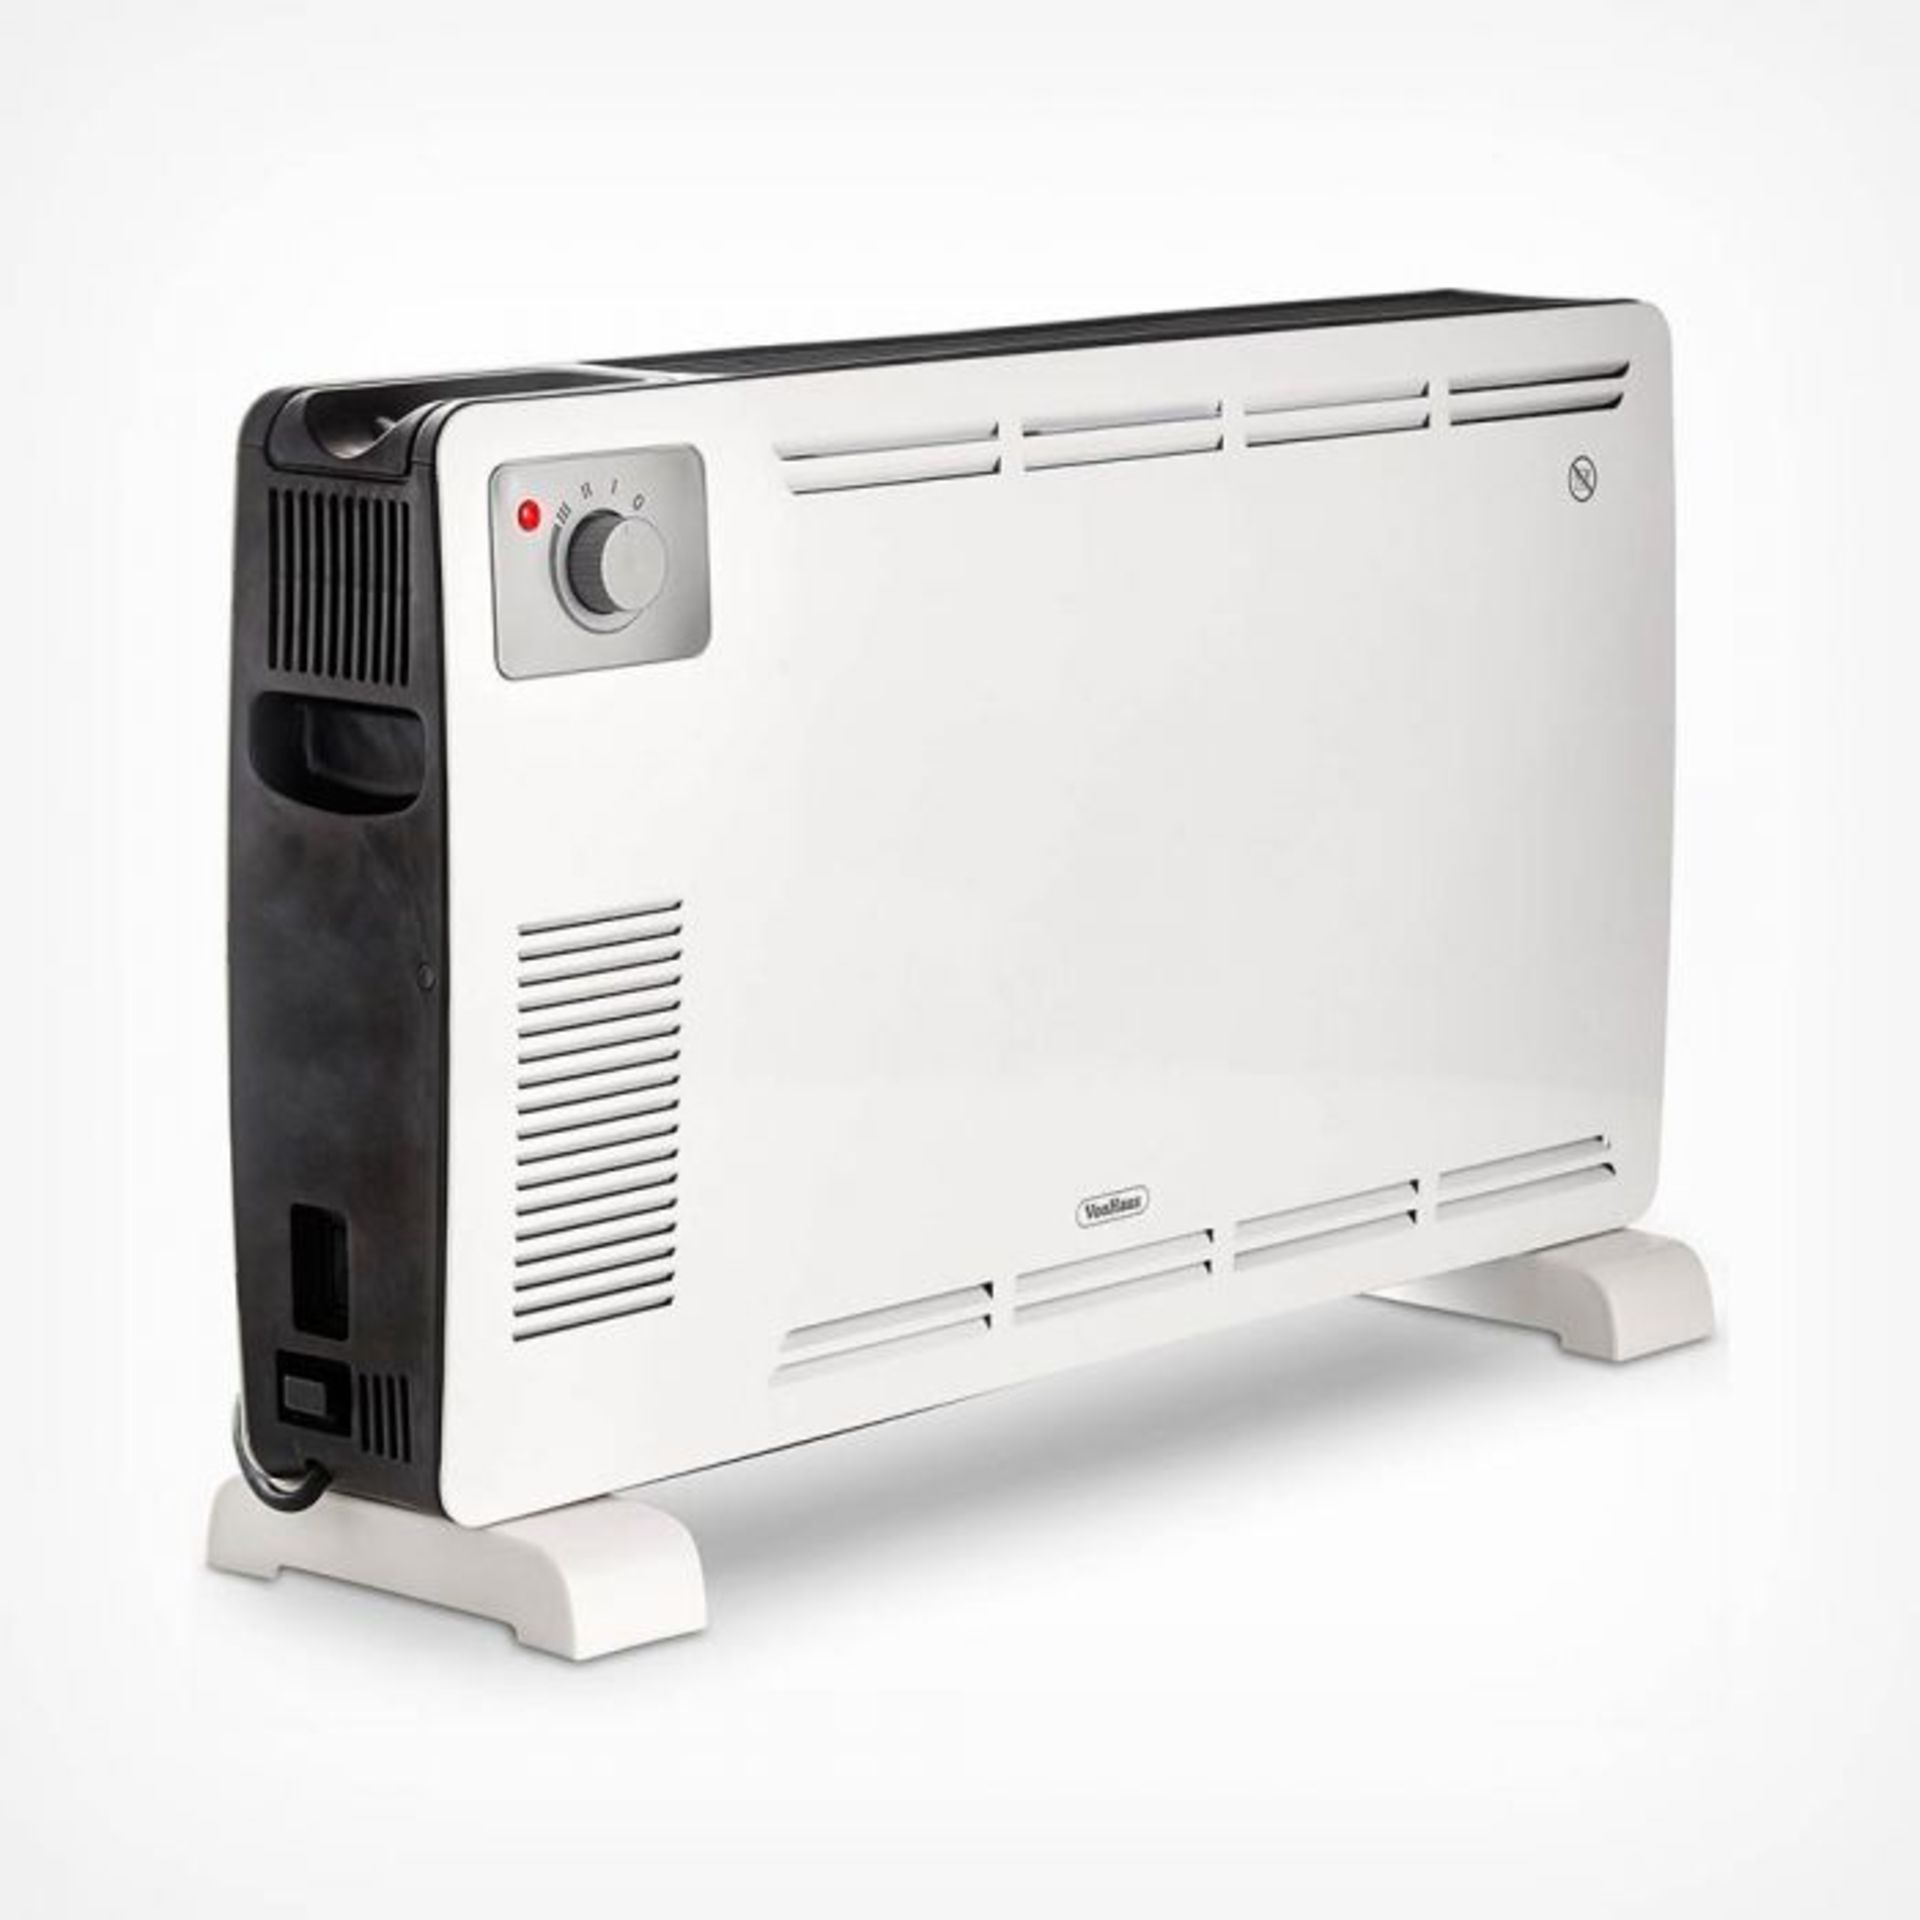 2200W Convector Heater - White. This convector heats up quickly thanks to convection technology. - Image 4 of 5